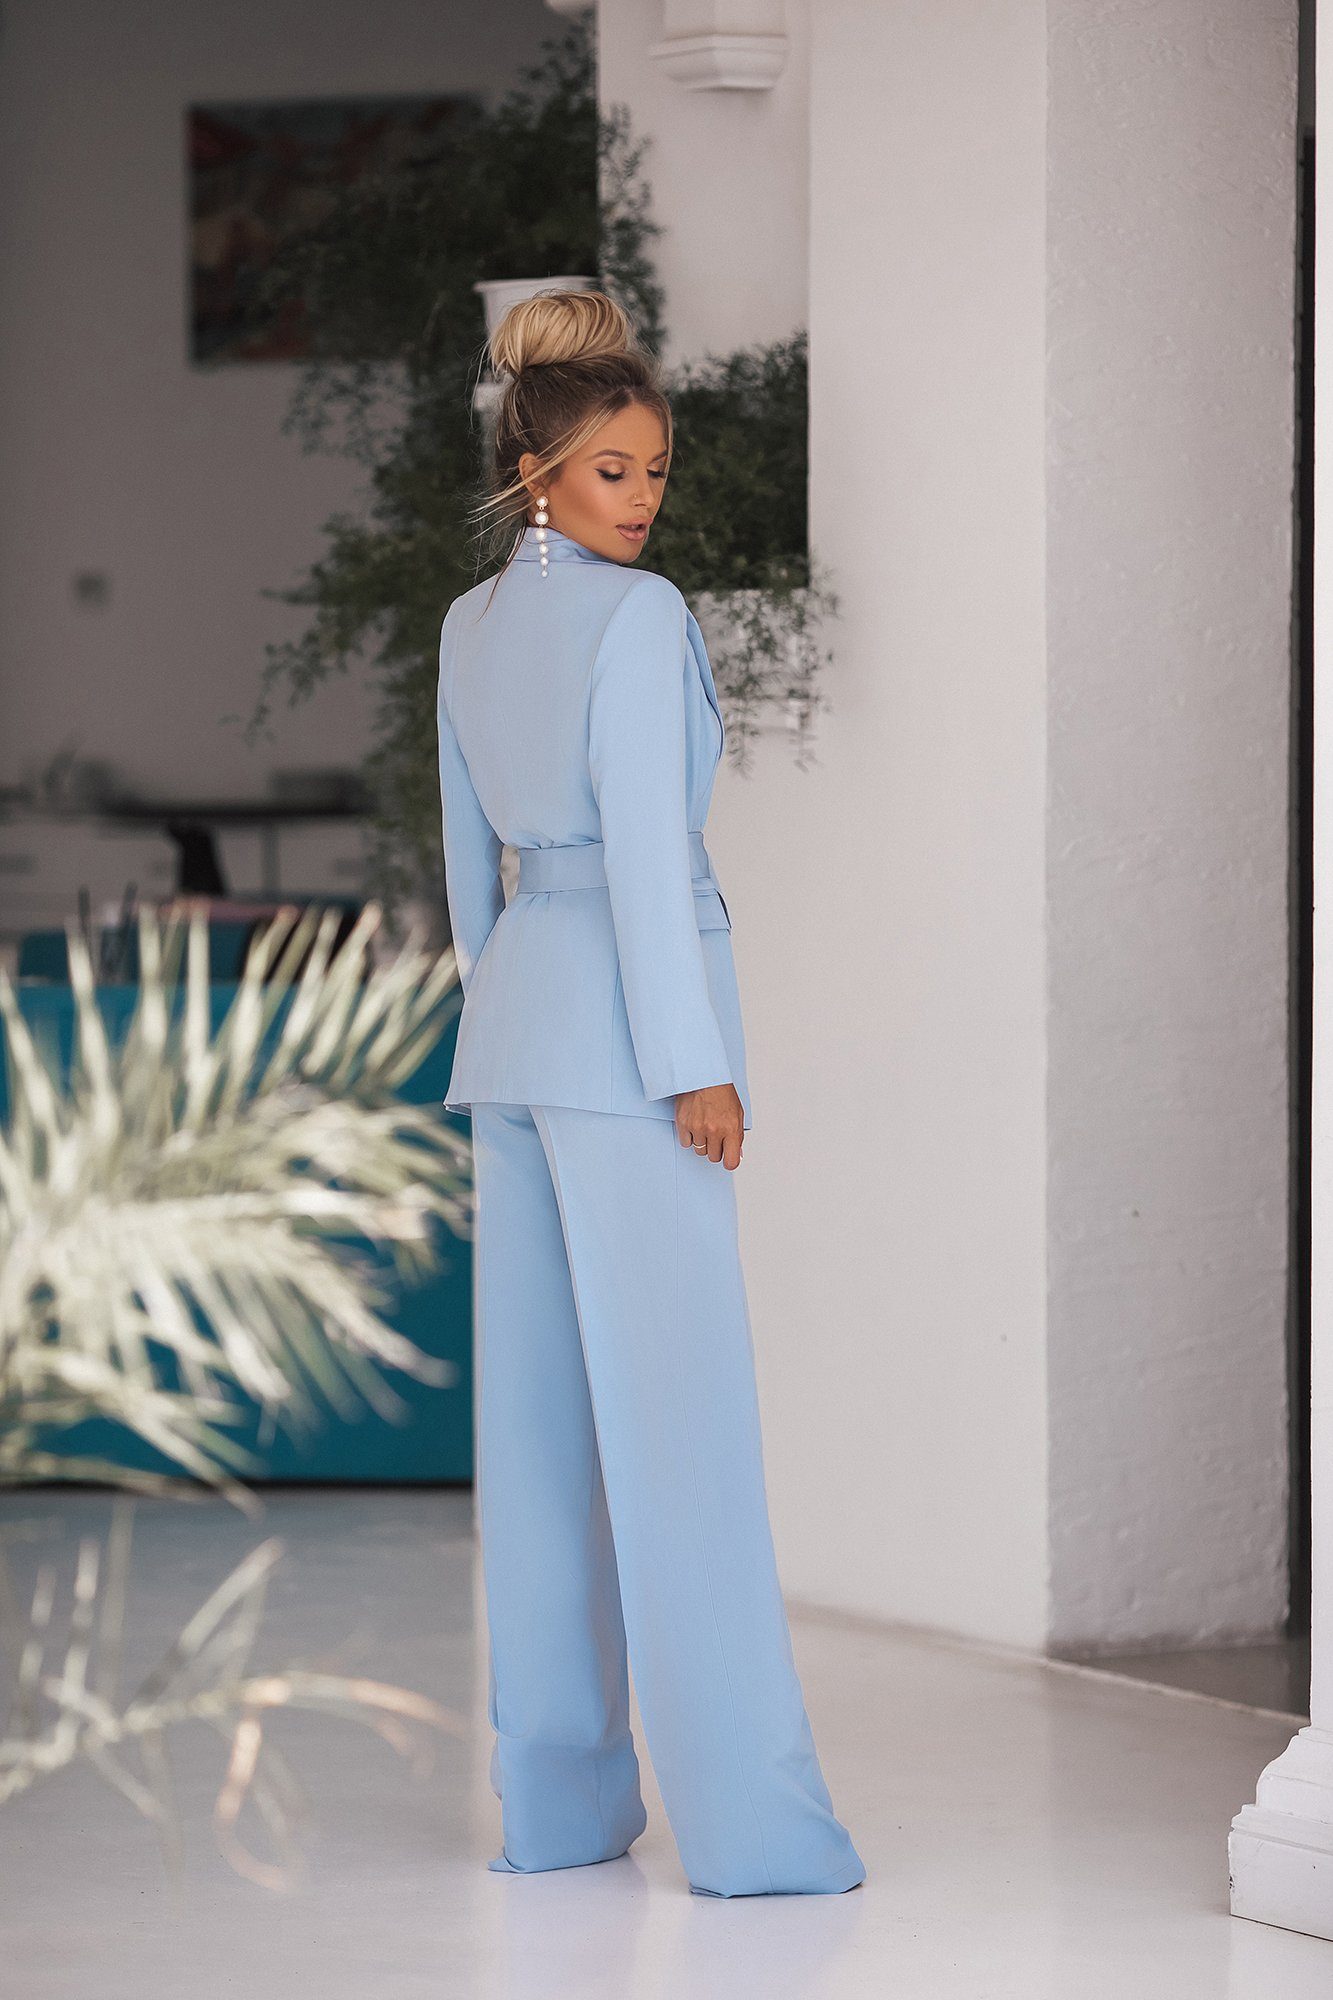 Sky-Blue Belted Double Breasted Suit 2-Piece